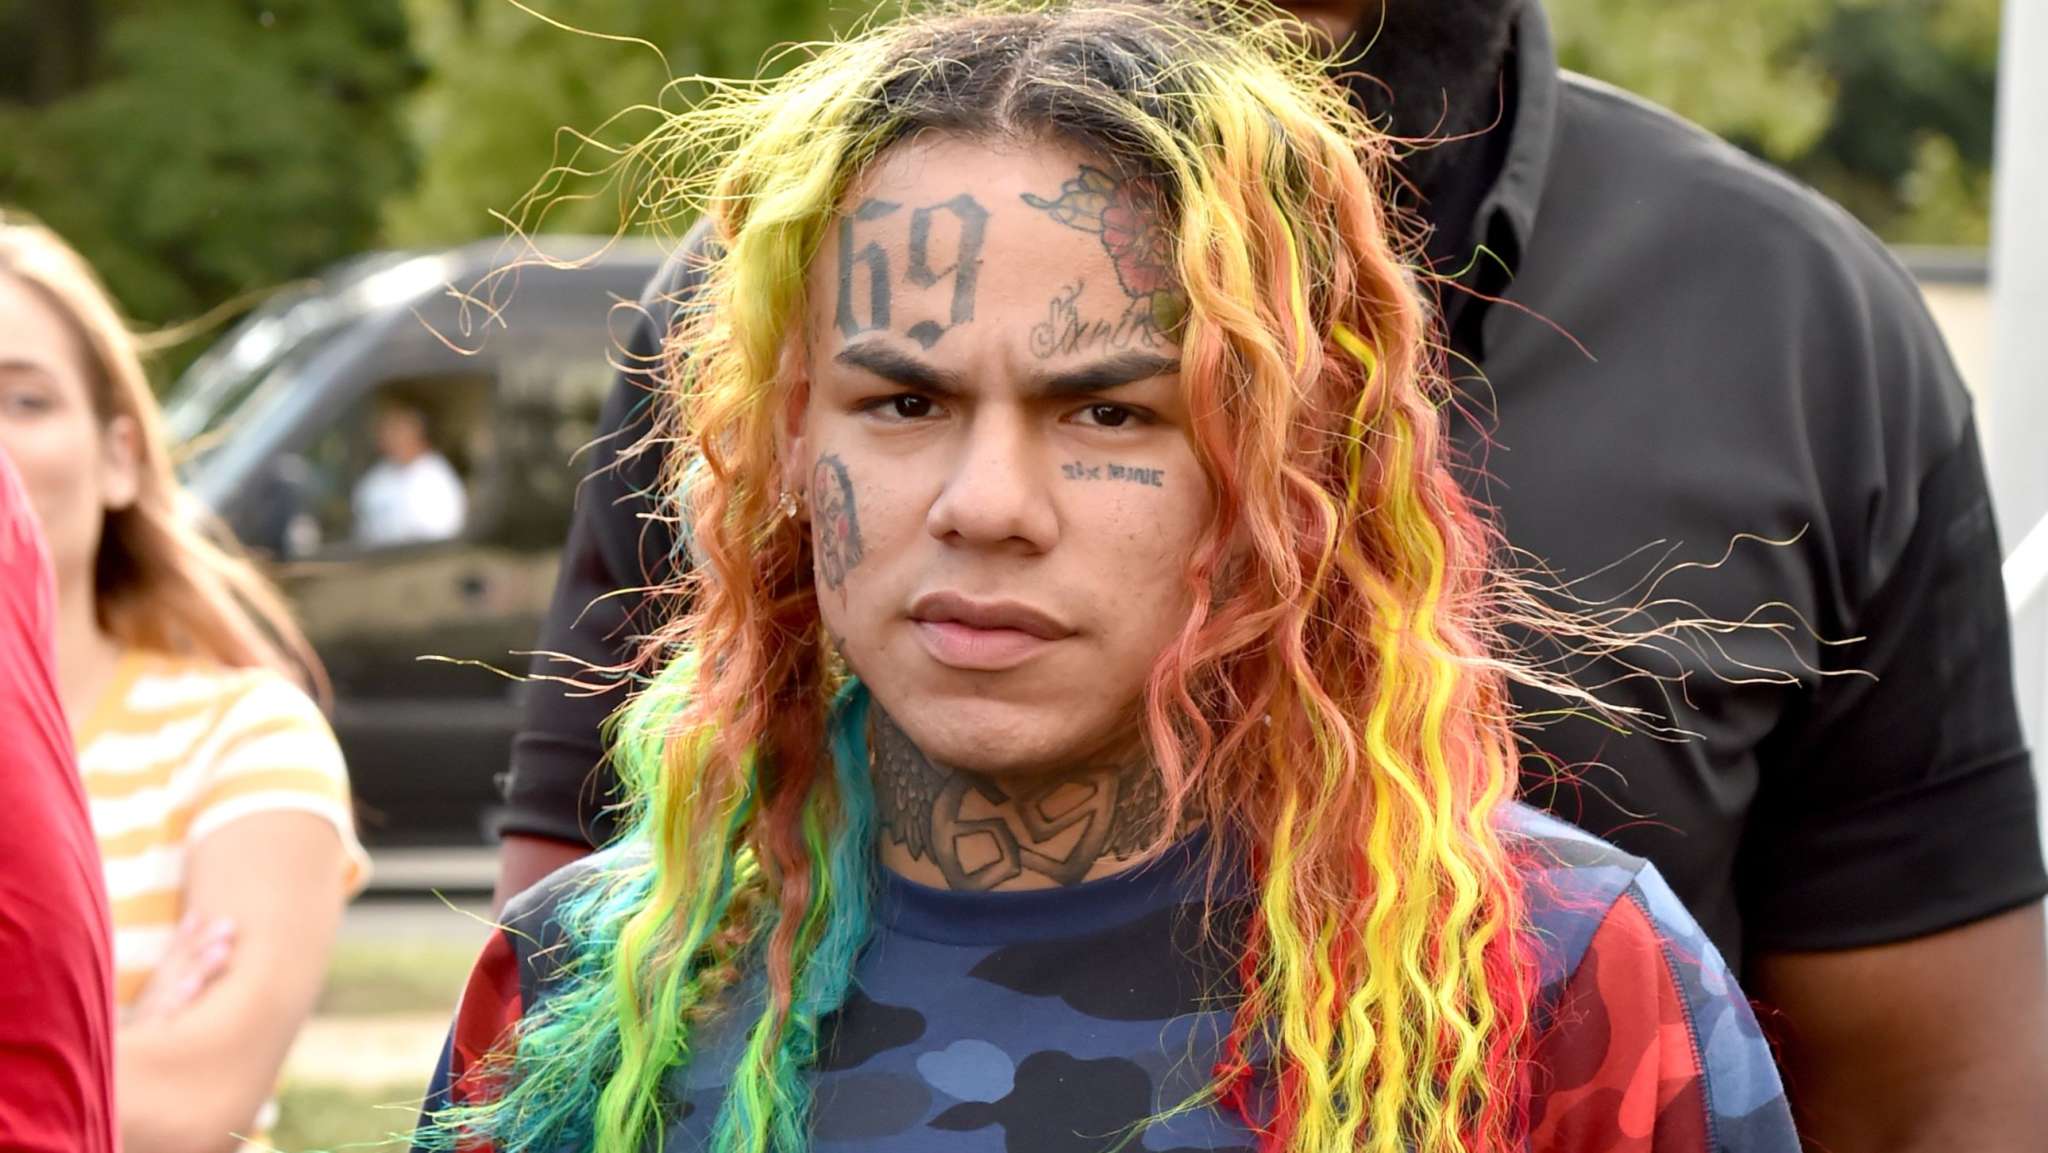 Tekashi 69 Gets His Assault Case Dismissed - Here's The Reason